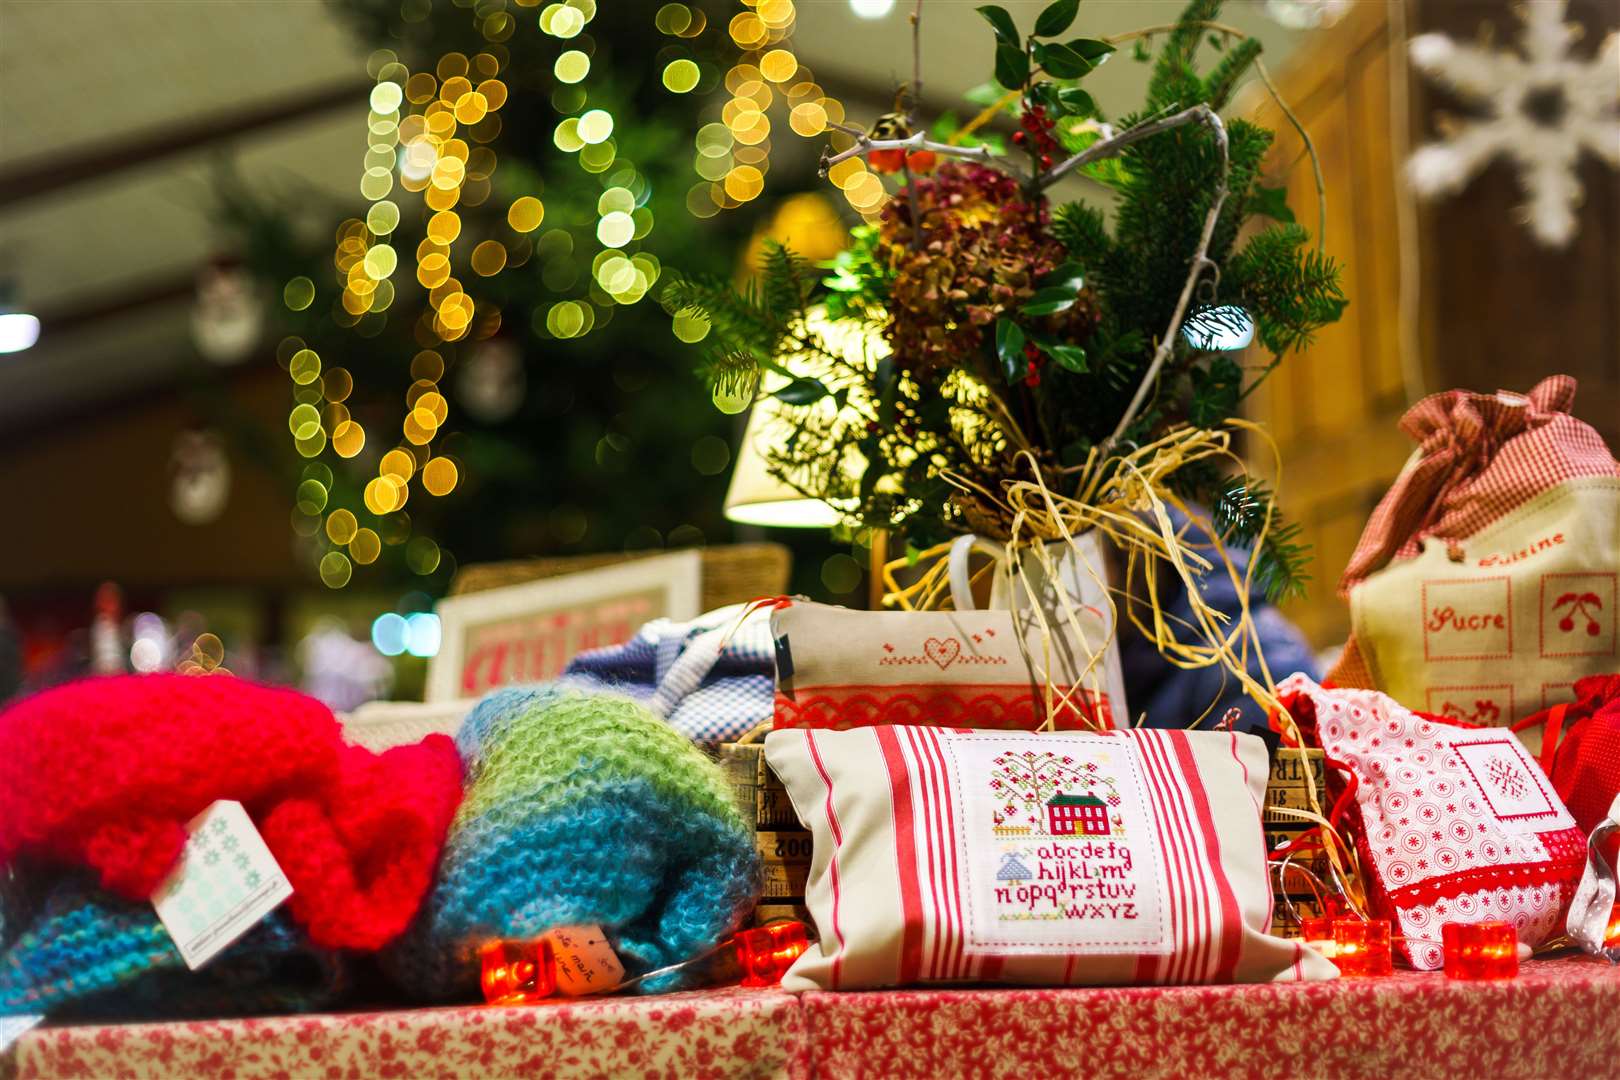 Dornoch's St Andrew's Fair is the perfect place to buy Christmas gifts and there will now be more choice than ever with stalls in four different locations.